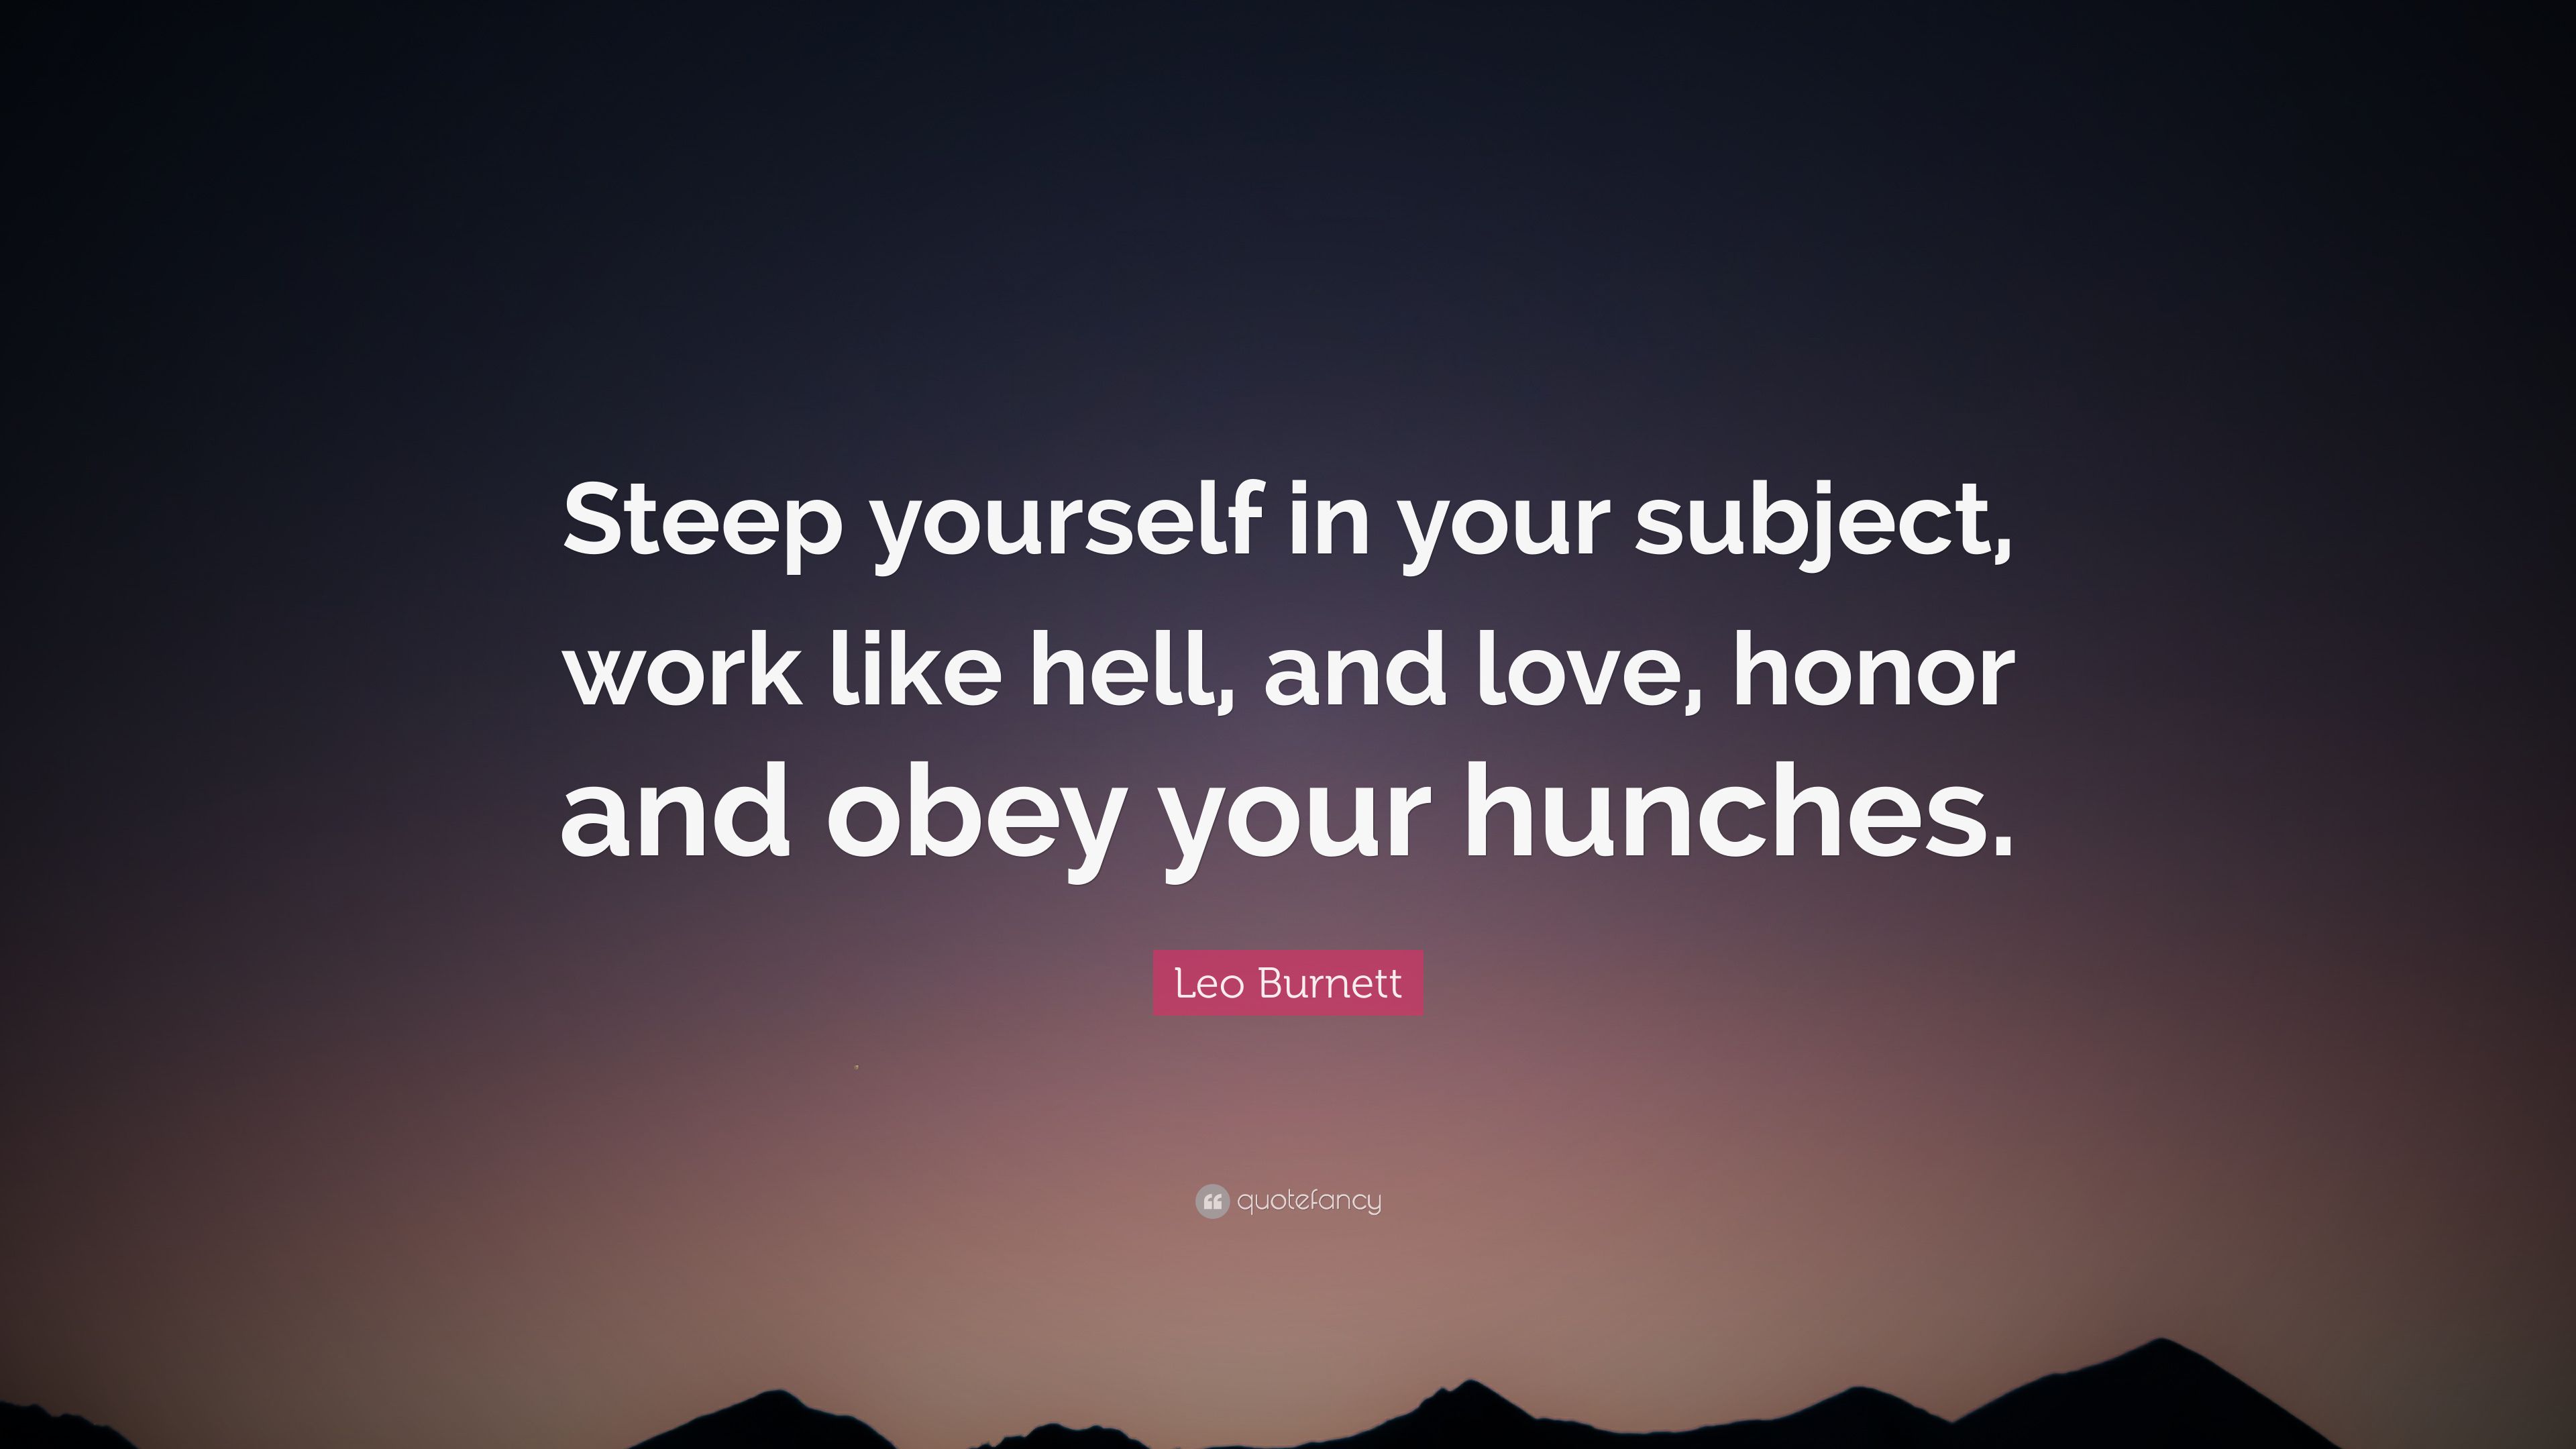 Leo Burnett Quote: “Steep yourself in your subject, work like hell, and love, honor and obey your hunches.” (7 wallpaper)